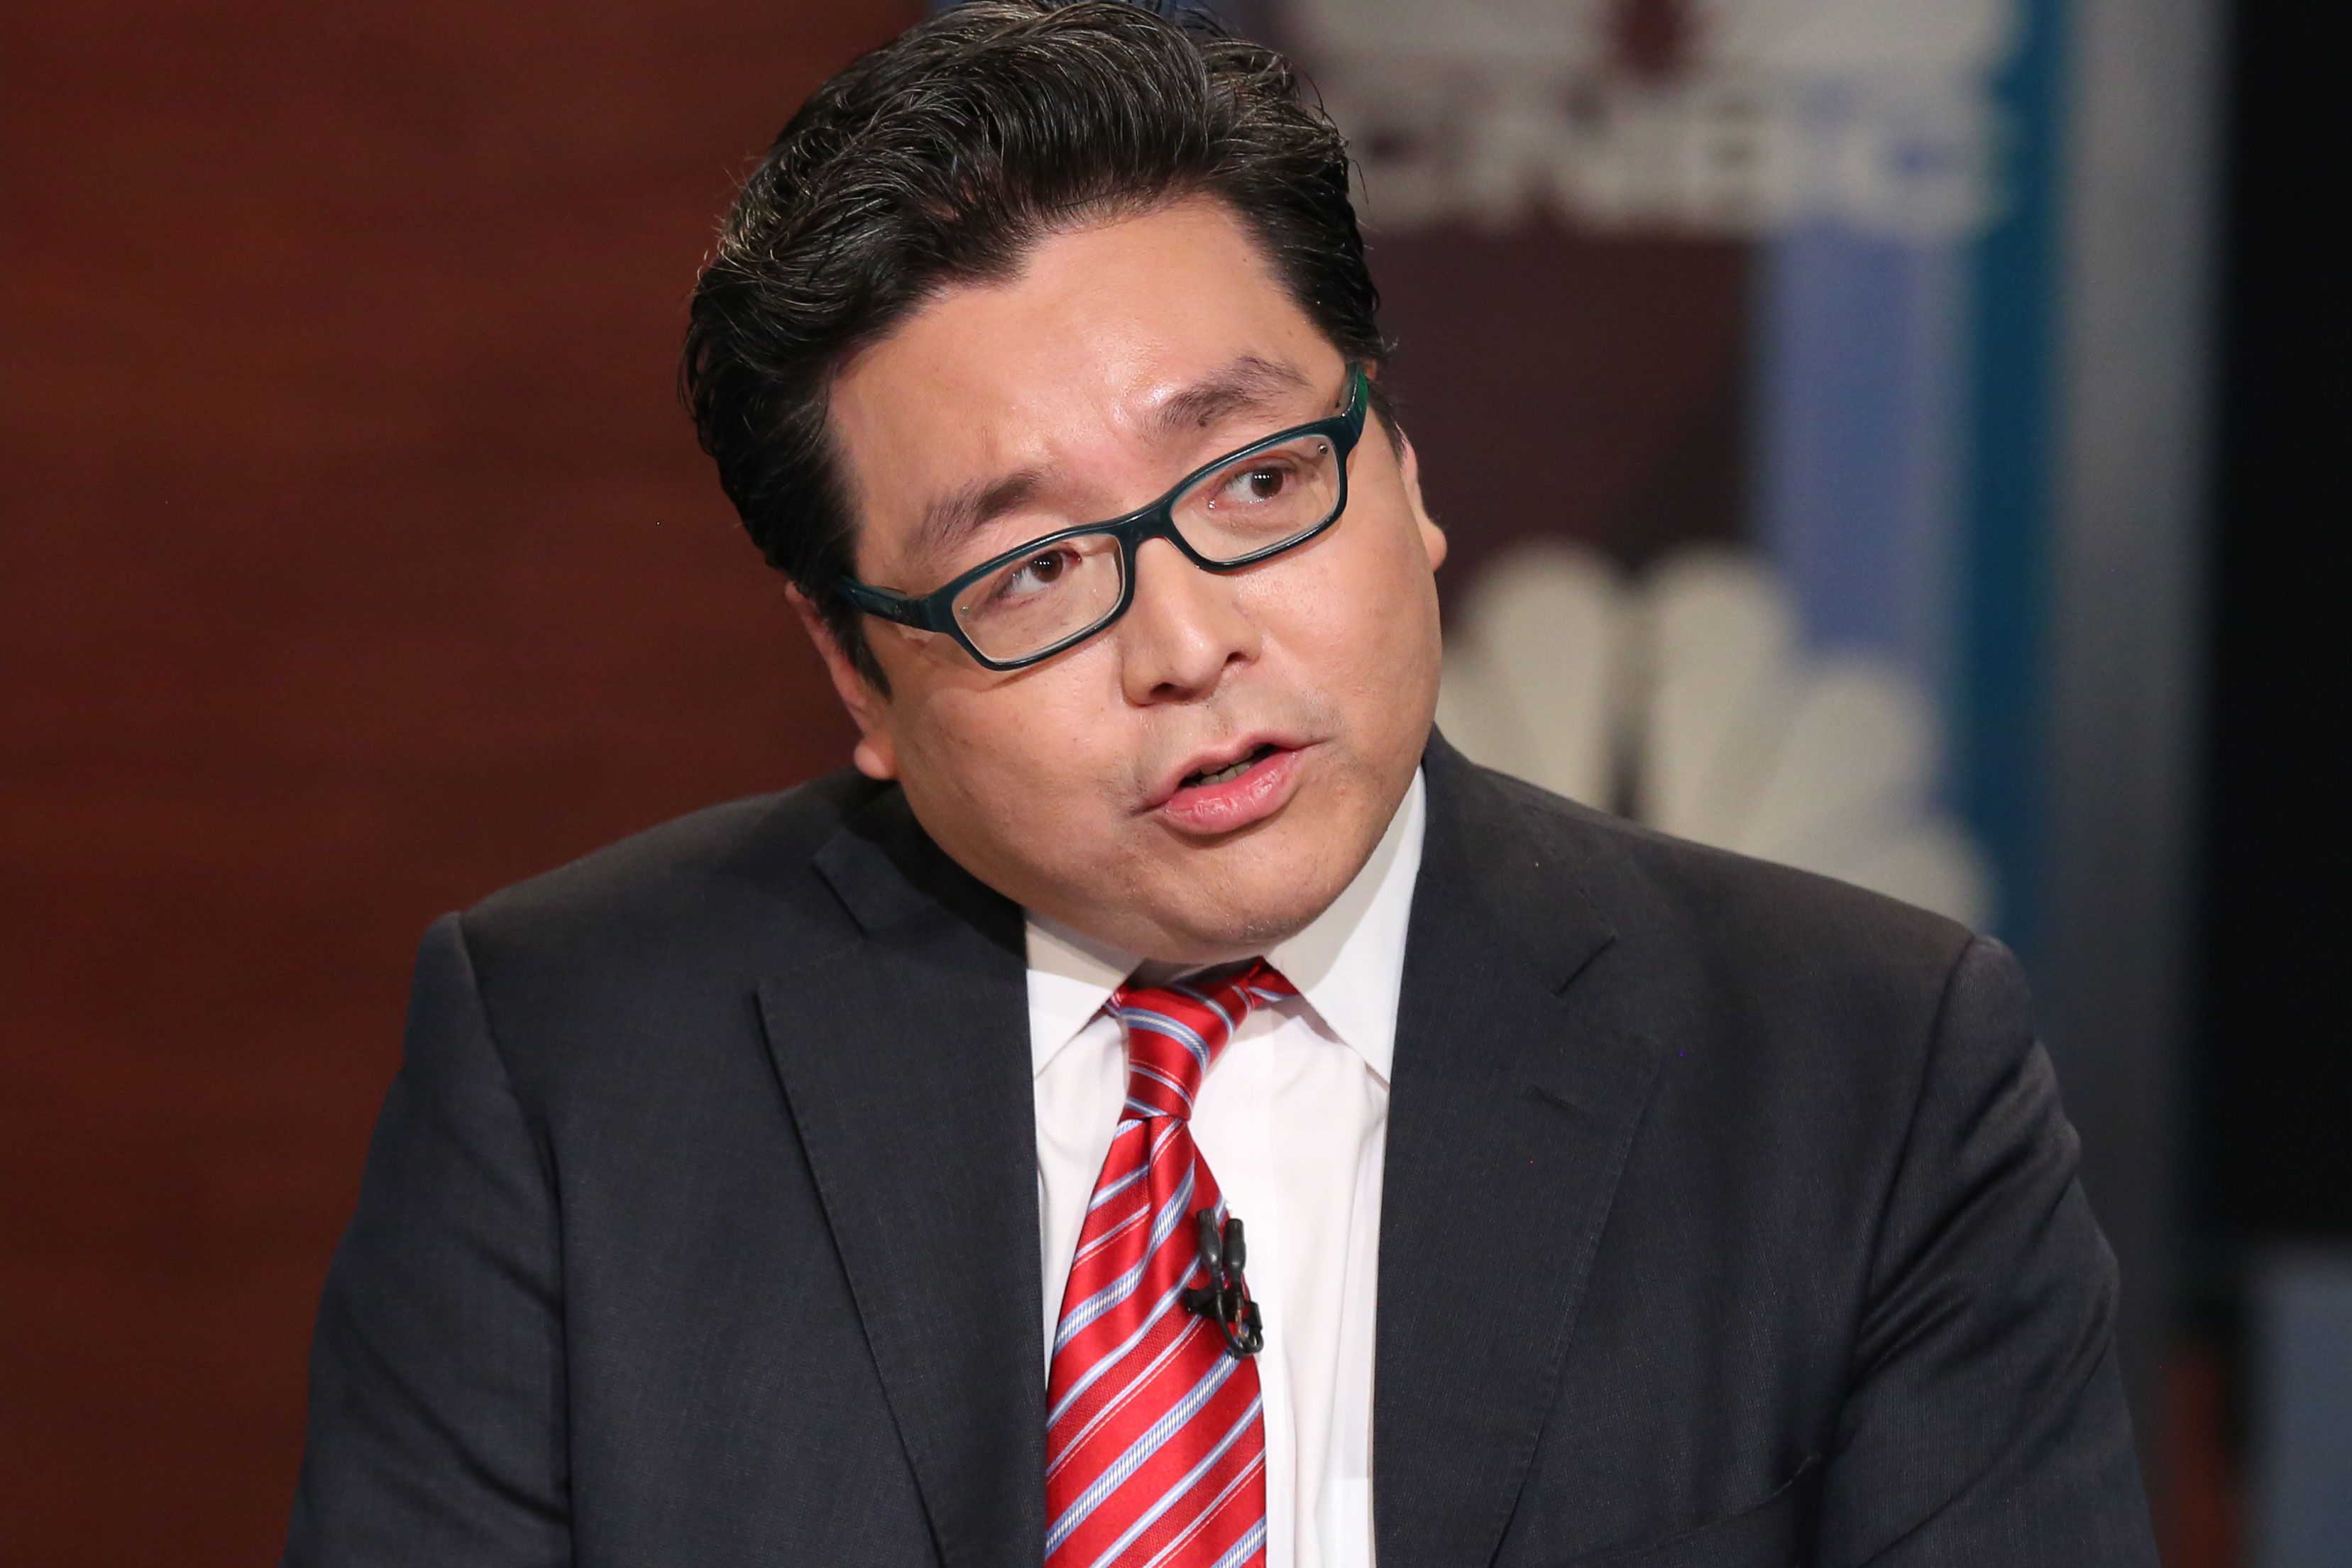 Crypto rally sparked by investors seeking hedge against rising global risks, says bitcoin bull Tom Lee